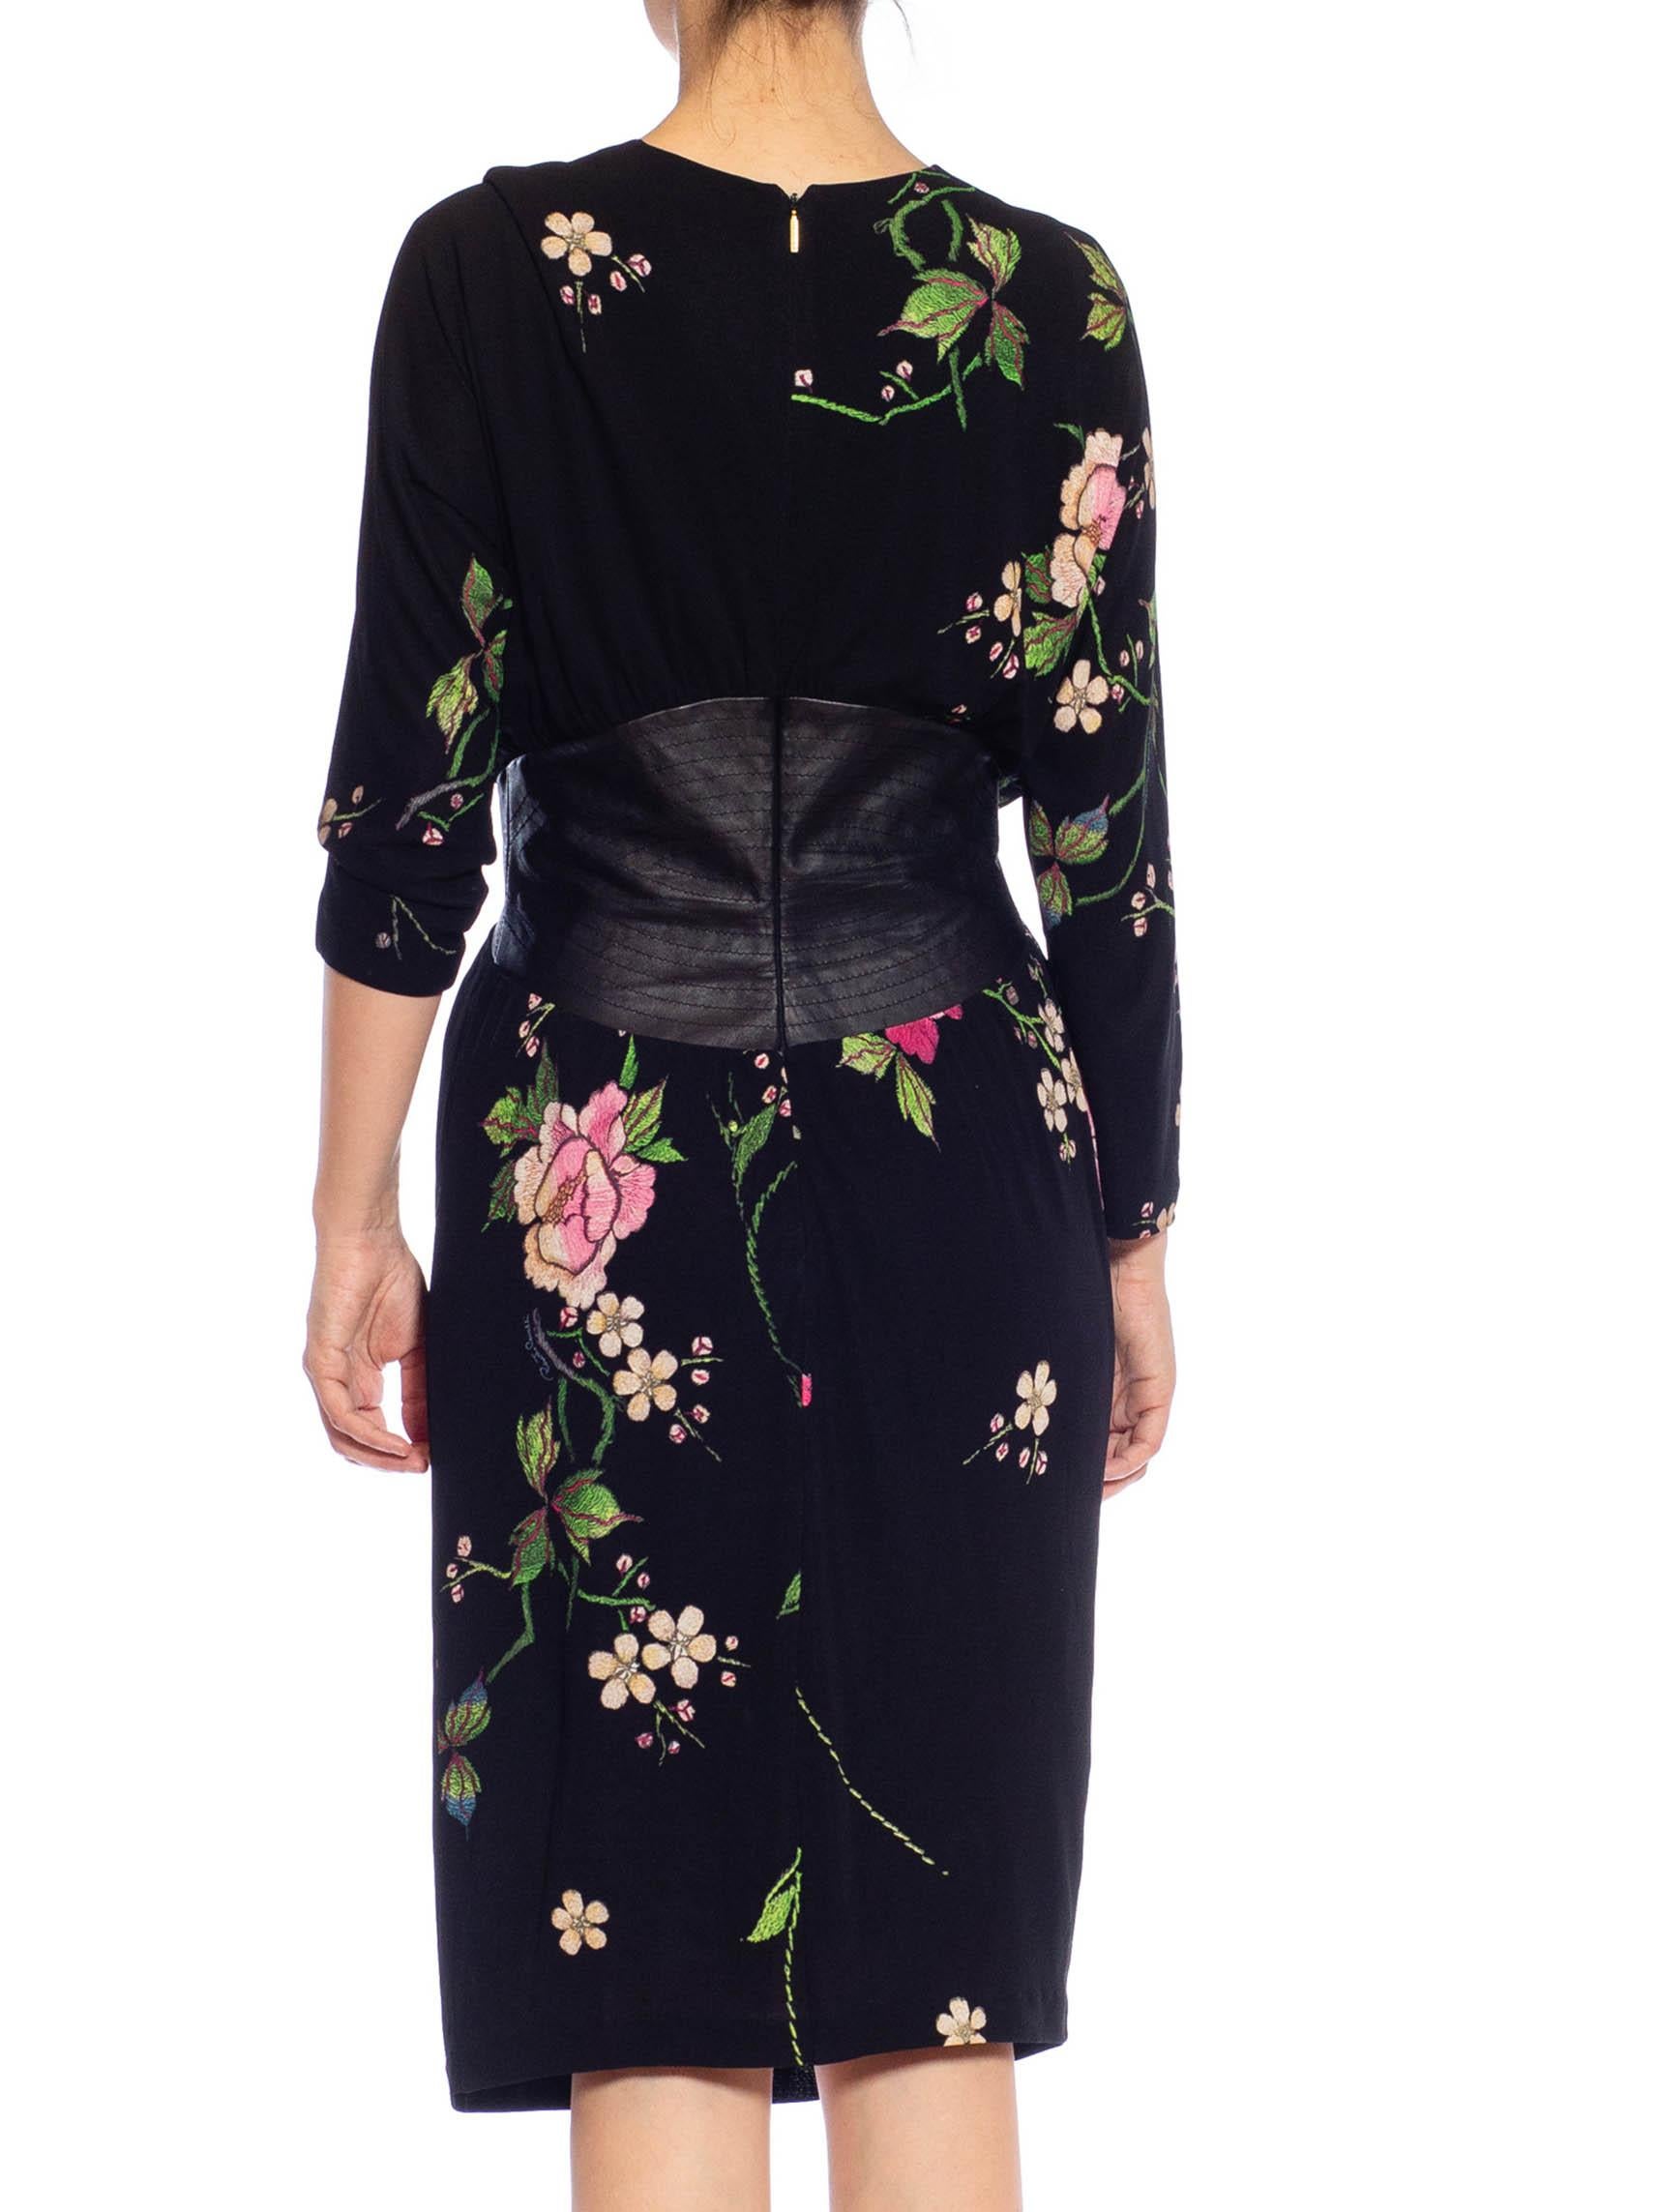 2000S ROBERTO CAVALLI Black Floral Rayon Jersey & Leather Dress For Sale 4